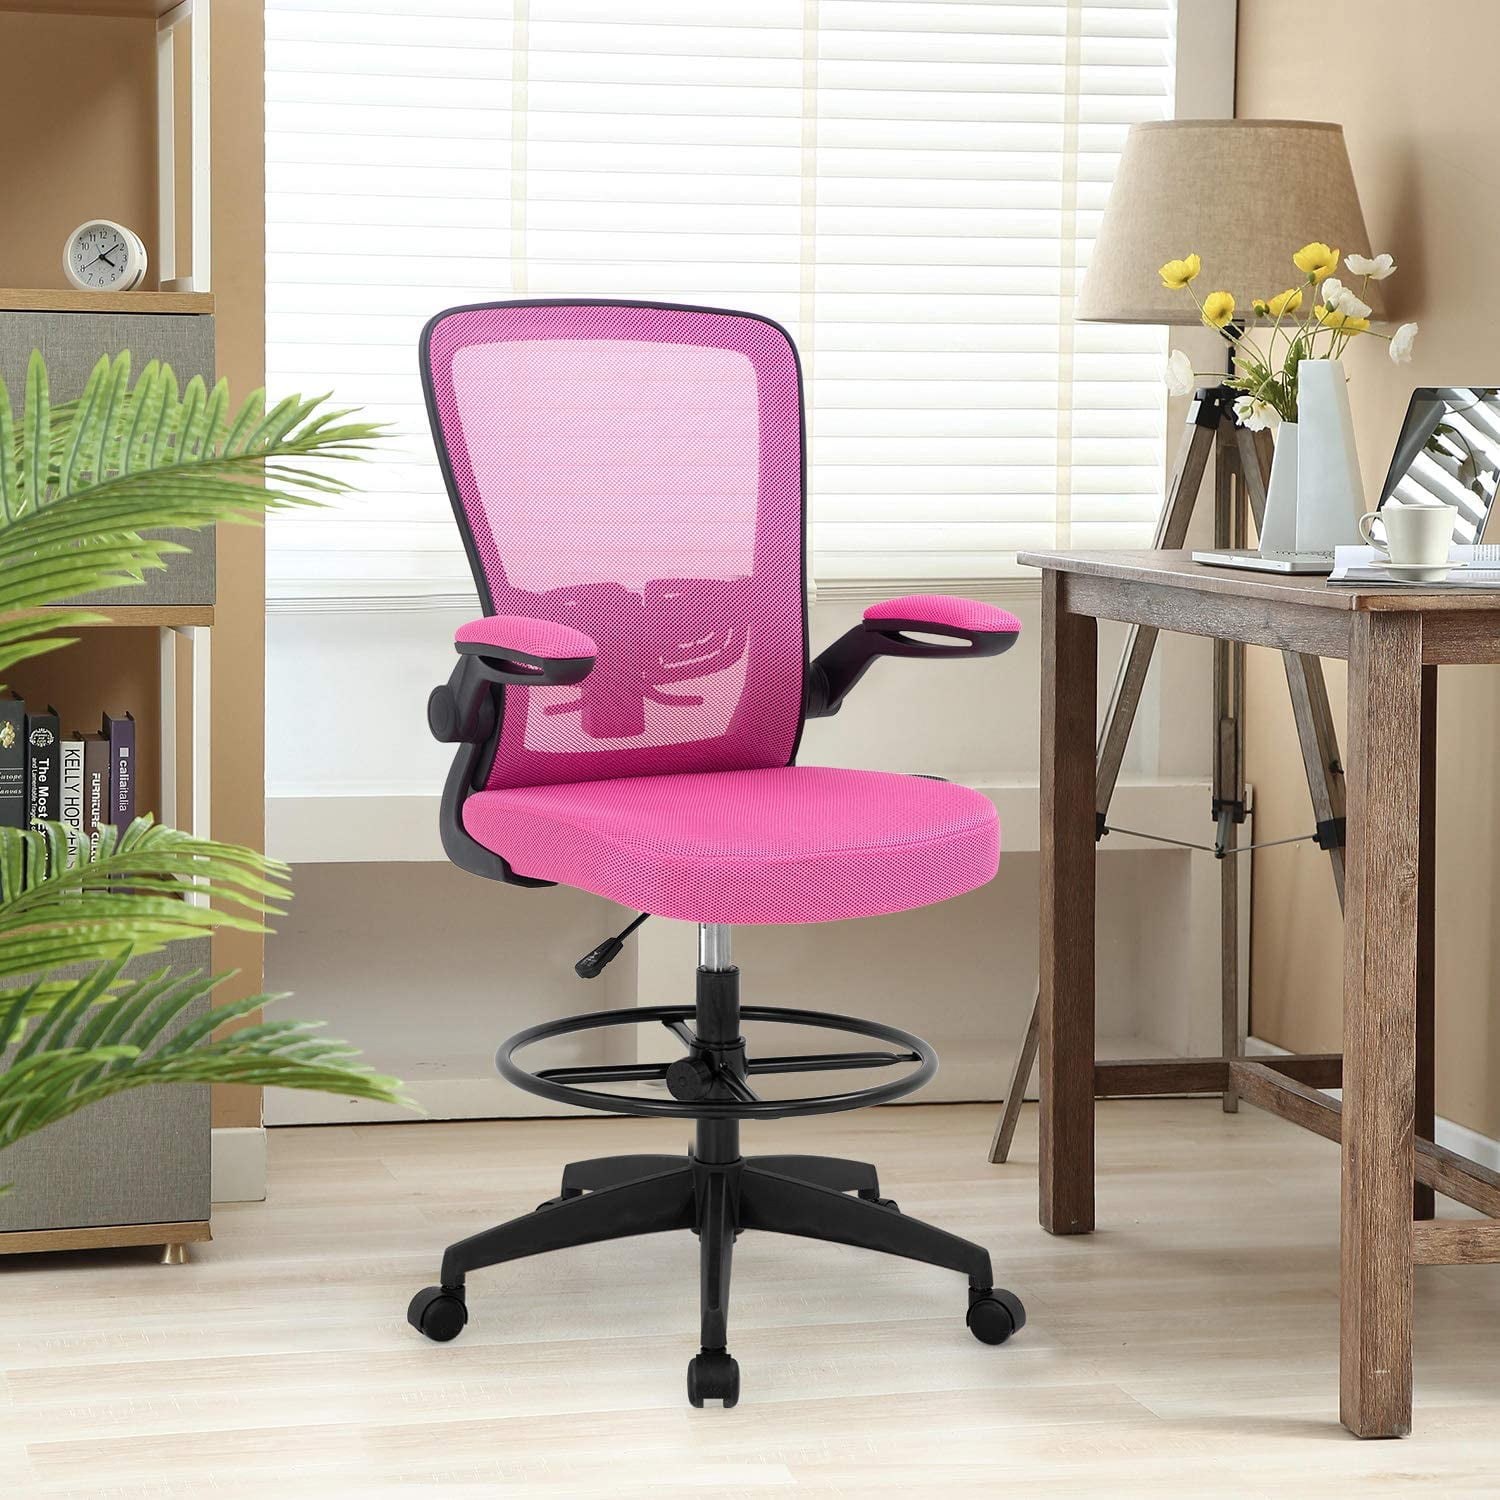 Pink Drafting Chair Ergonomic Tall Office Chair with Arms Foot Rest Back Support Adjustable Height Rolling Swivel Desk Chair Mesh Drafting Stool for Standing Desk Adults Women